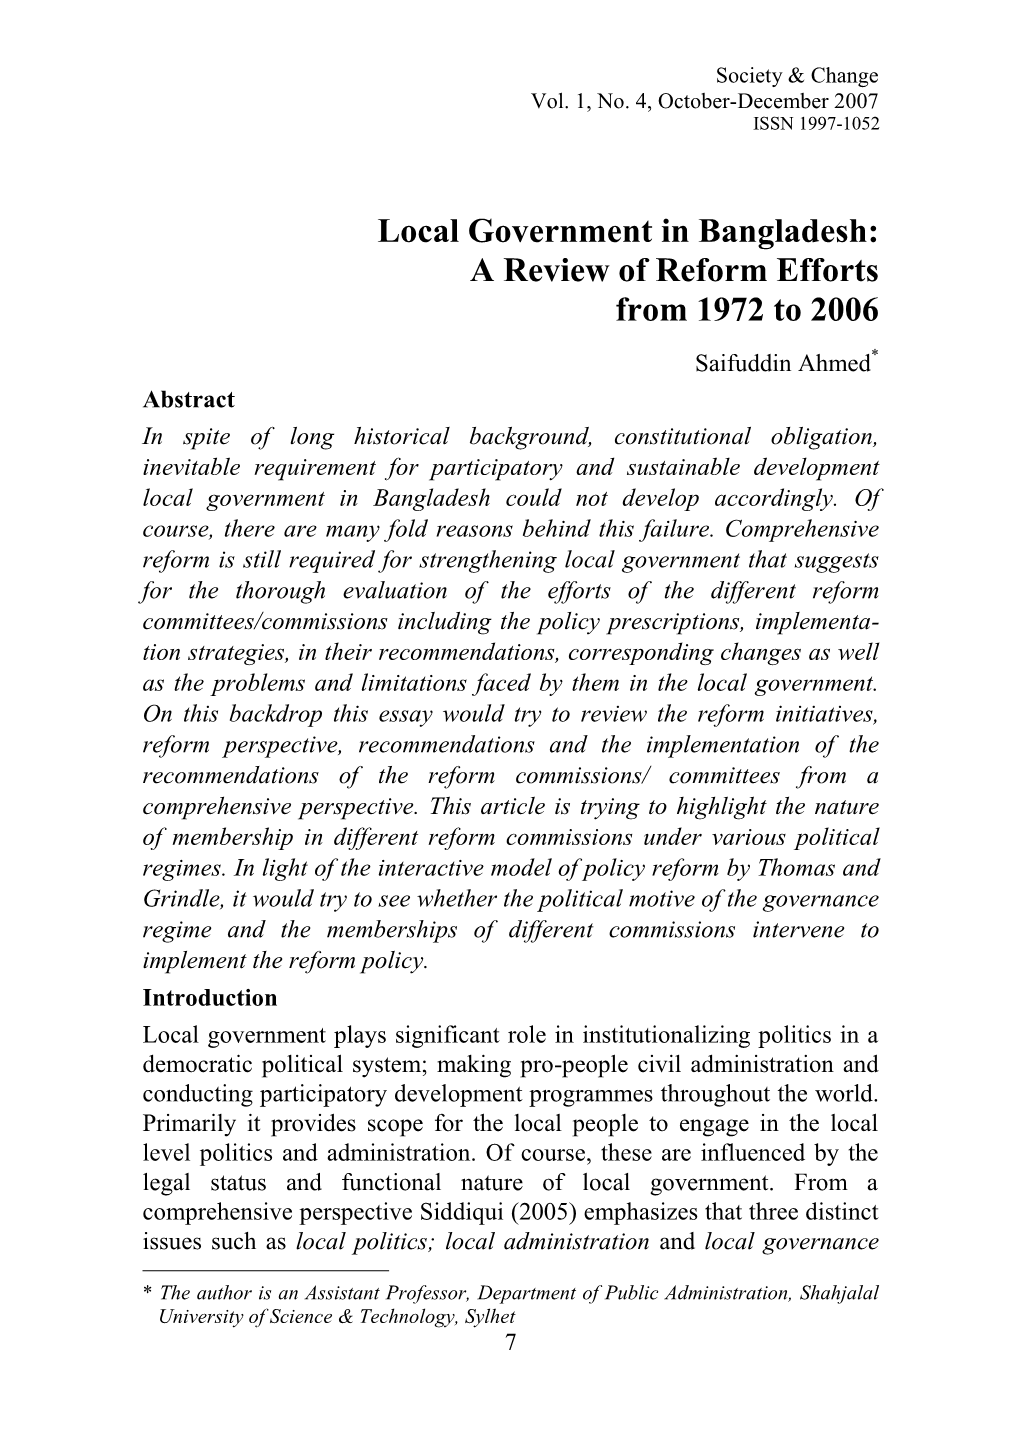 Actors and Factors of Local Government in Bangladesh